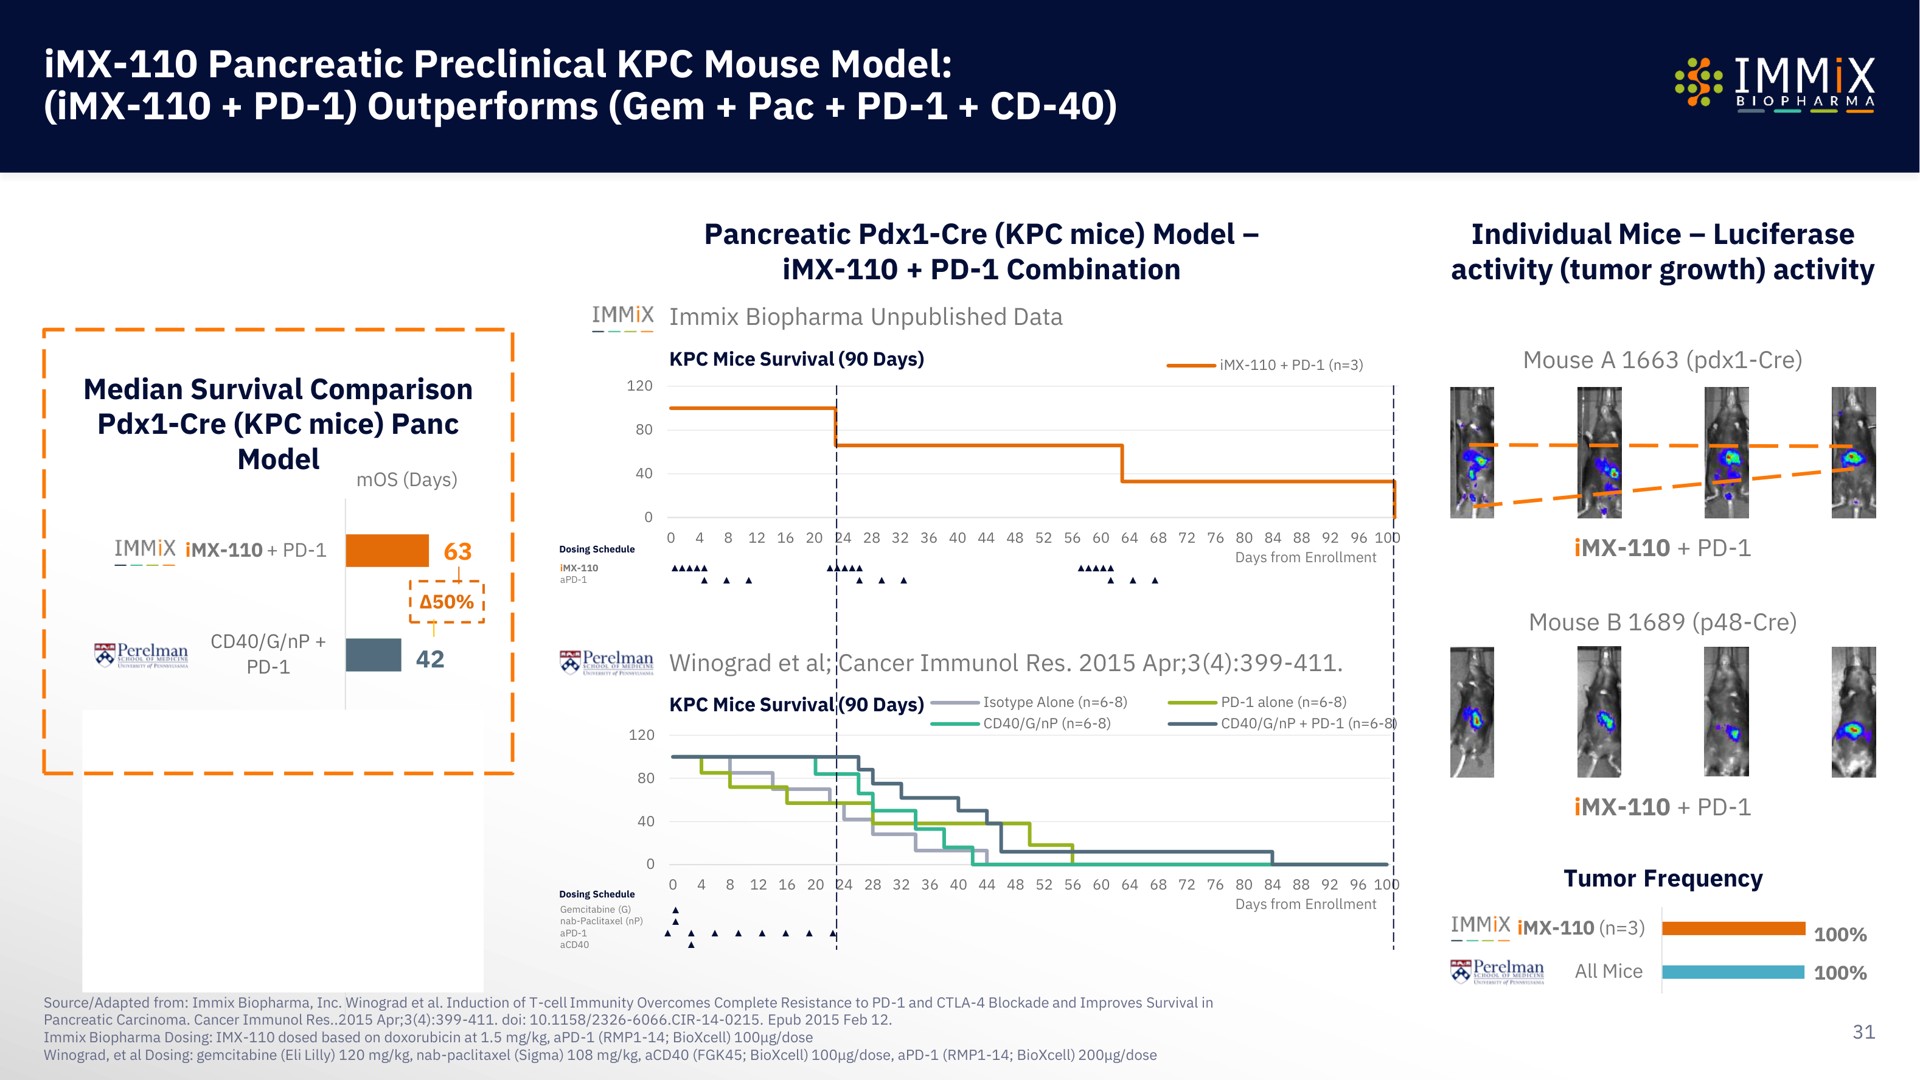 pancreatic preclinical mouse model outperforms gem pac | Immix Biopharma